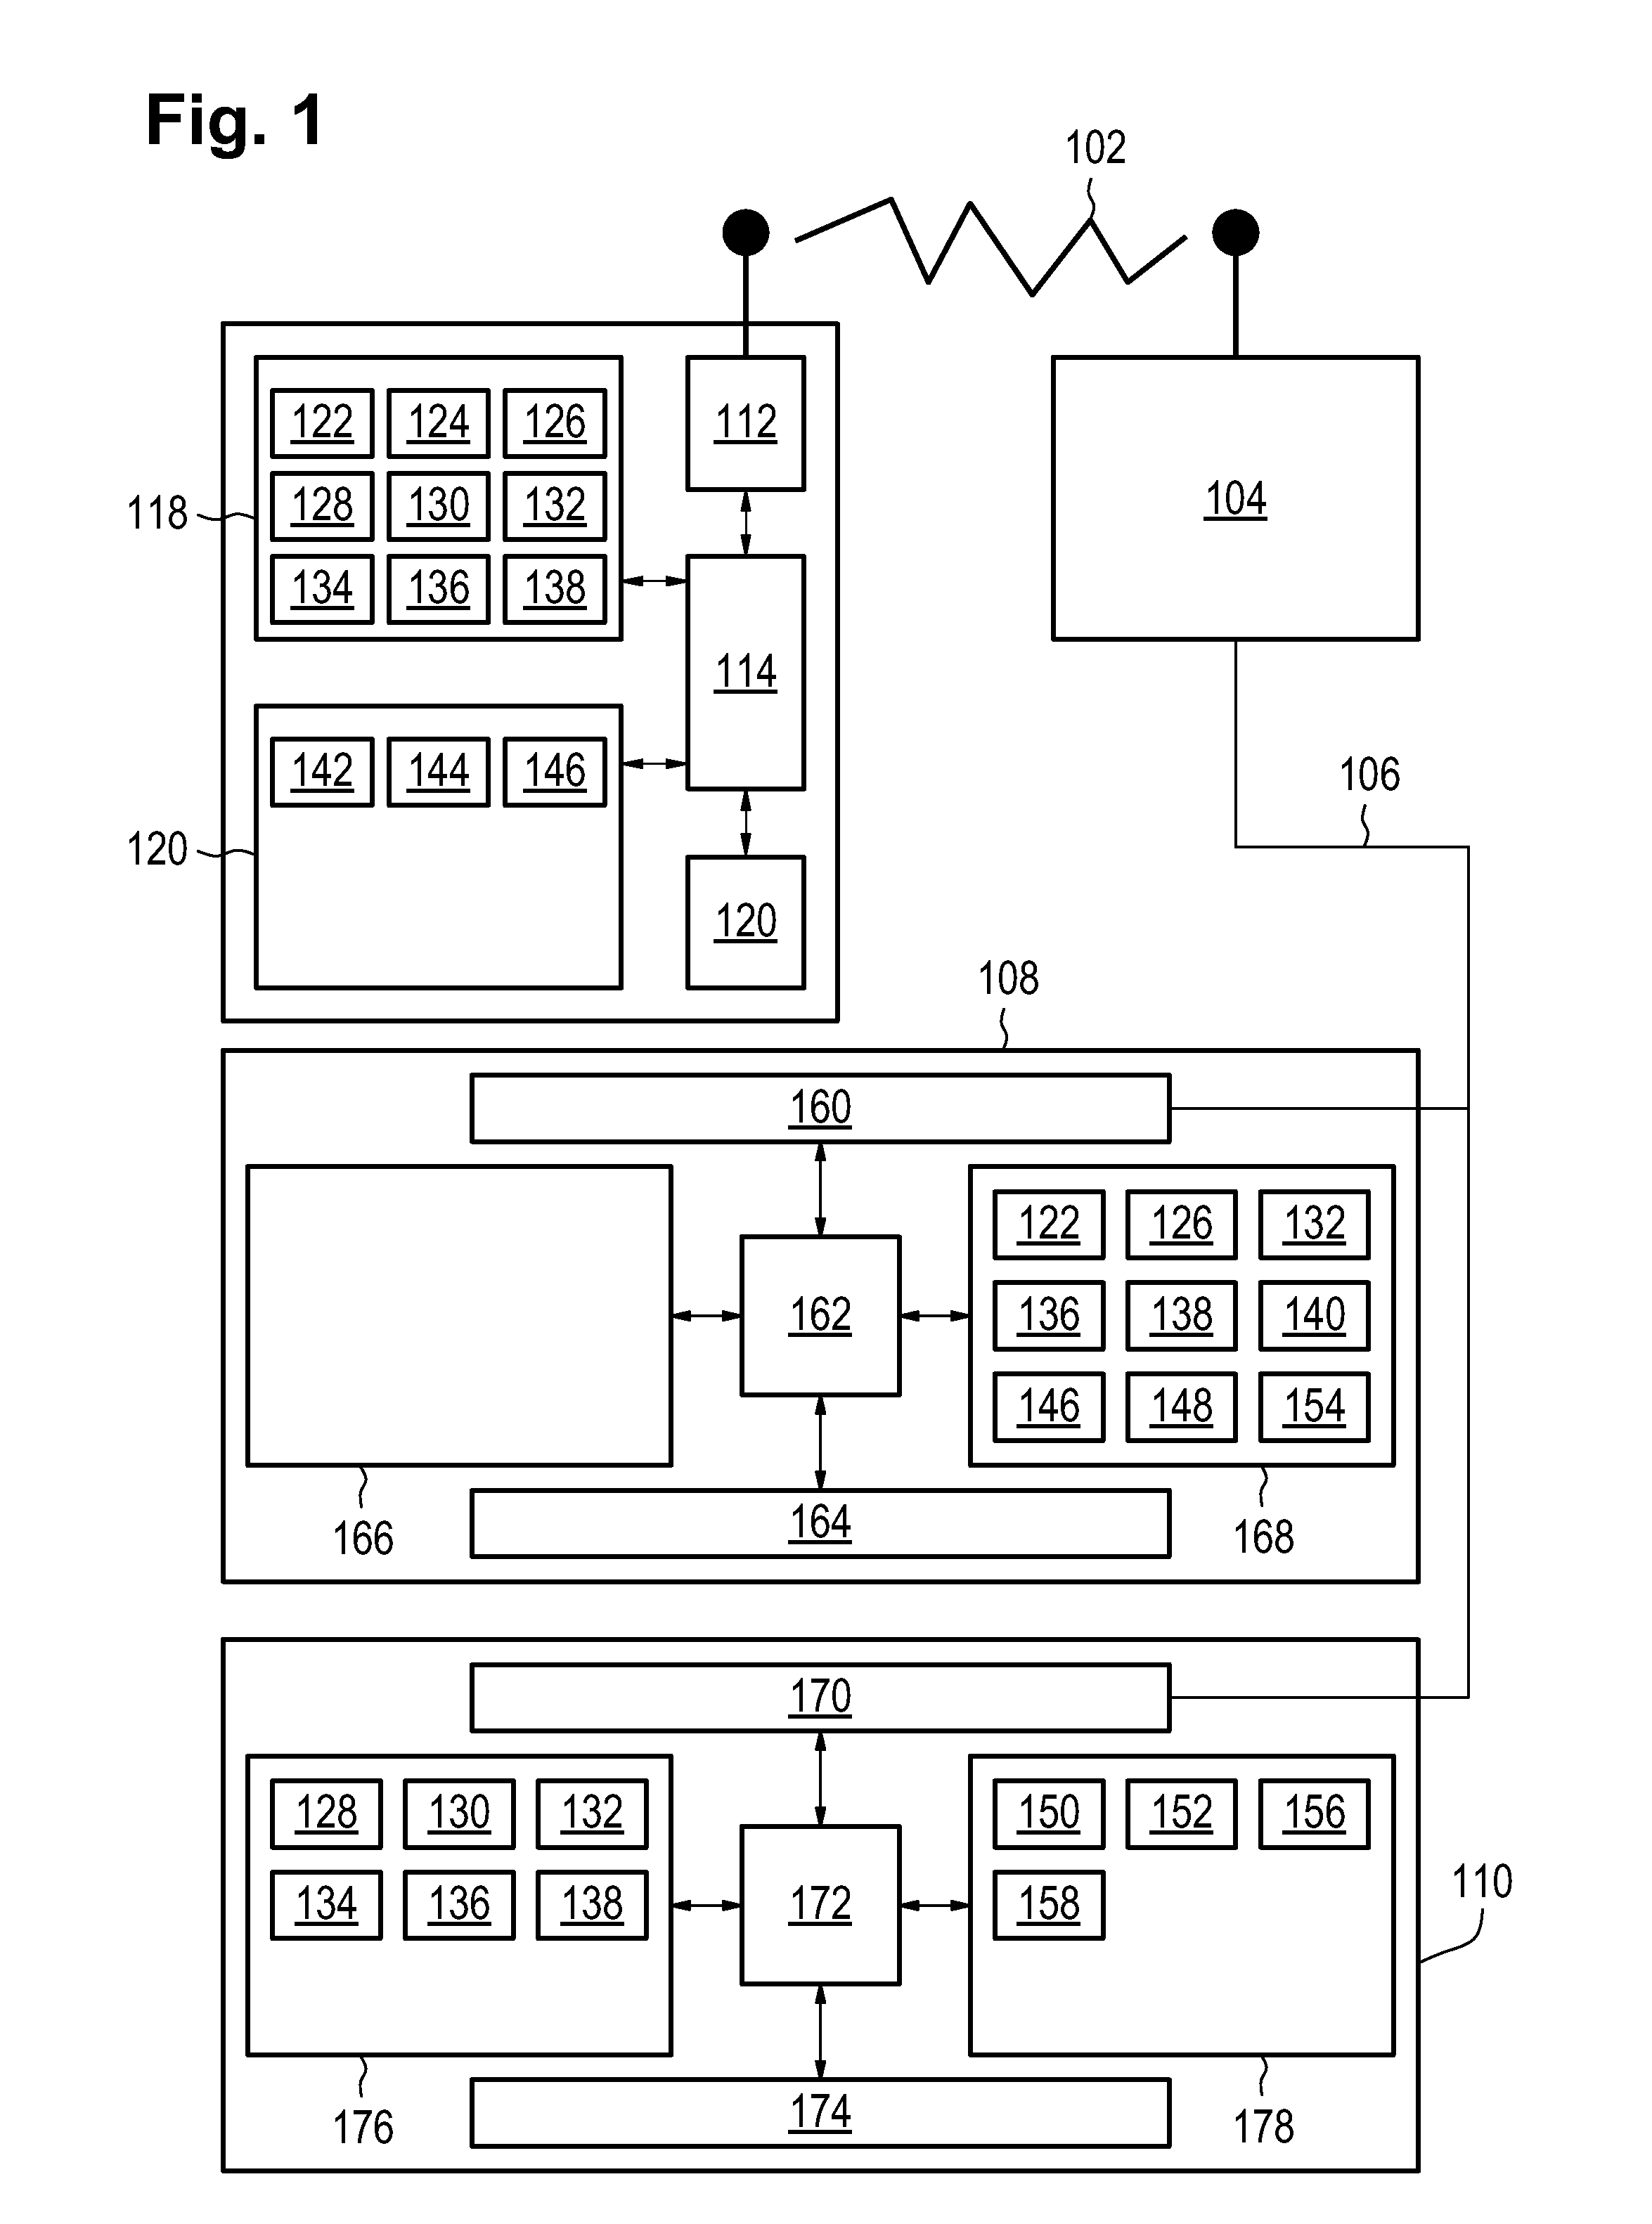 Telecommunication method for securely exchanging data